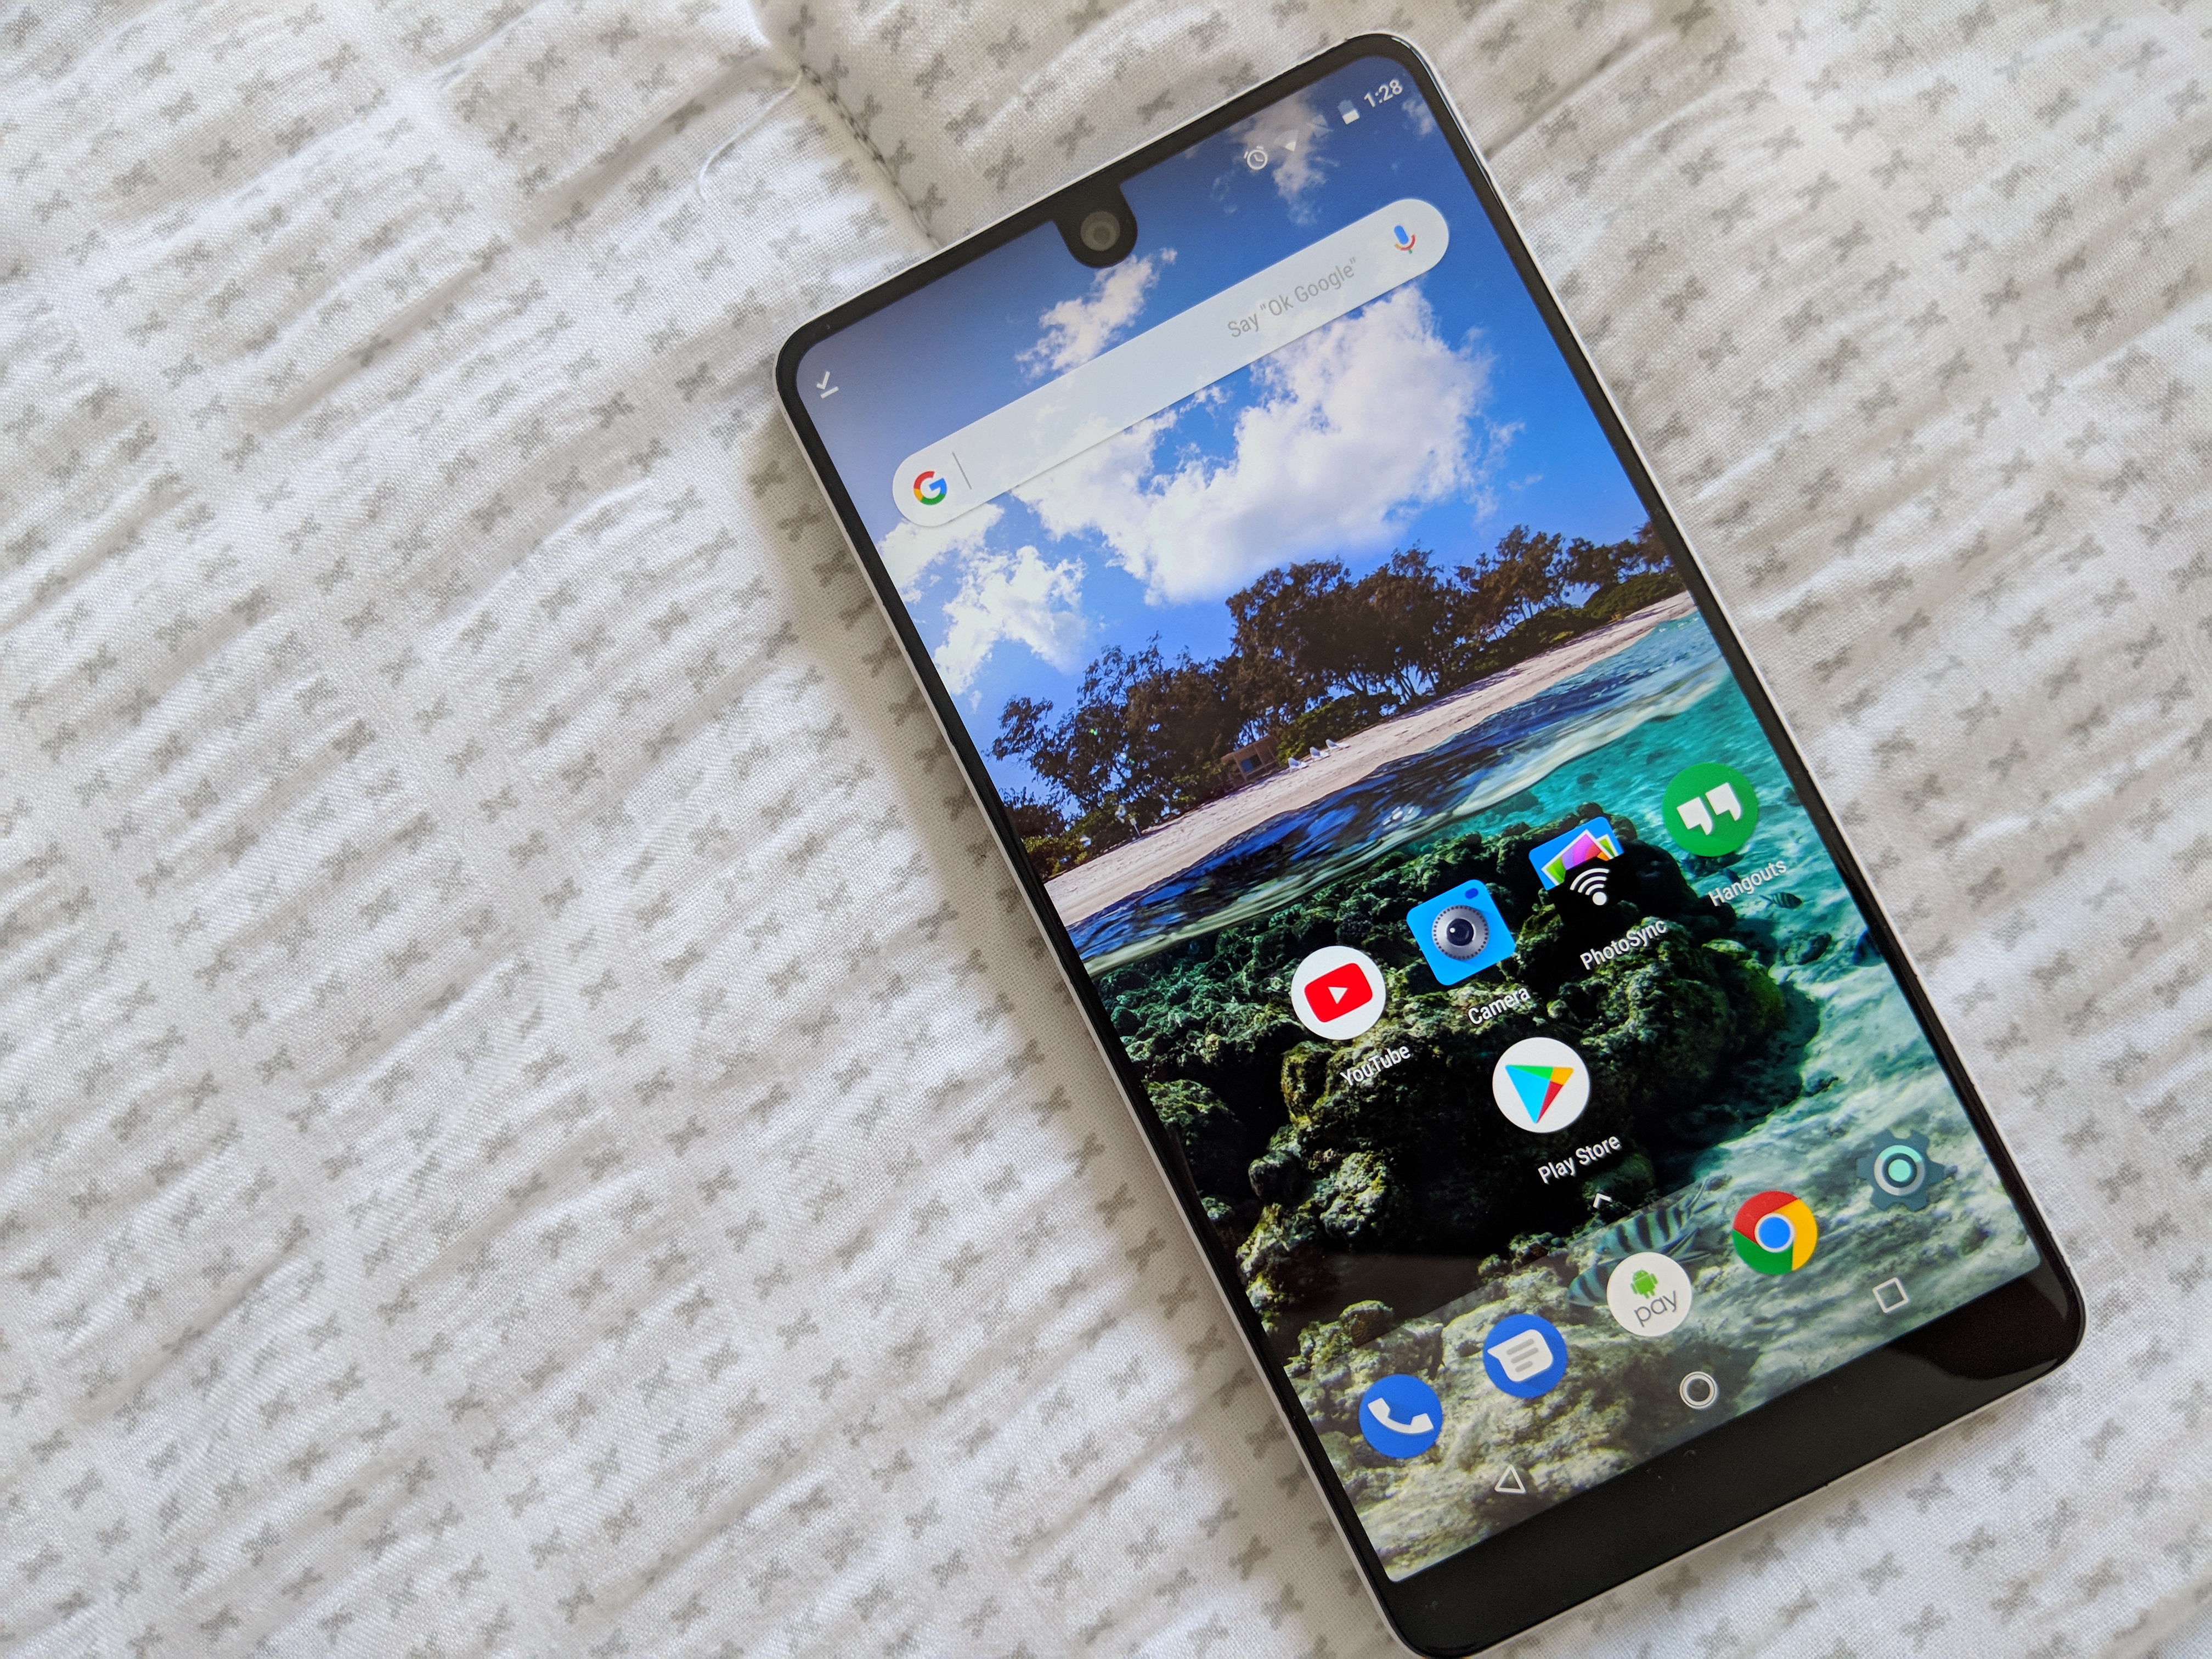 Google Wallpapers Adds 34 New Seascapes Walls For Everyone - Essential Phone Android 10 - HD Wallpaper 